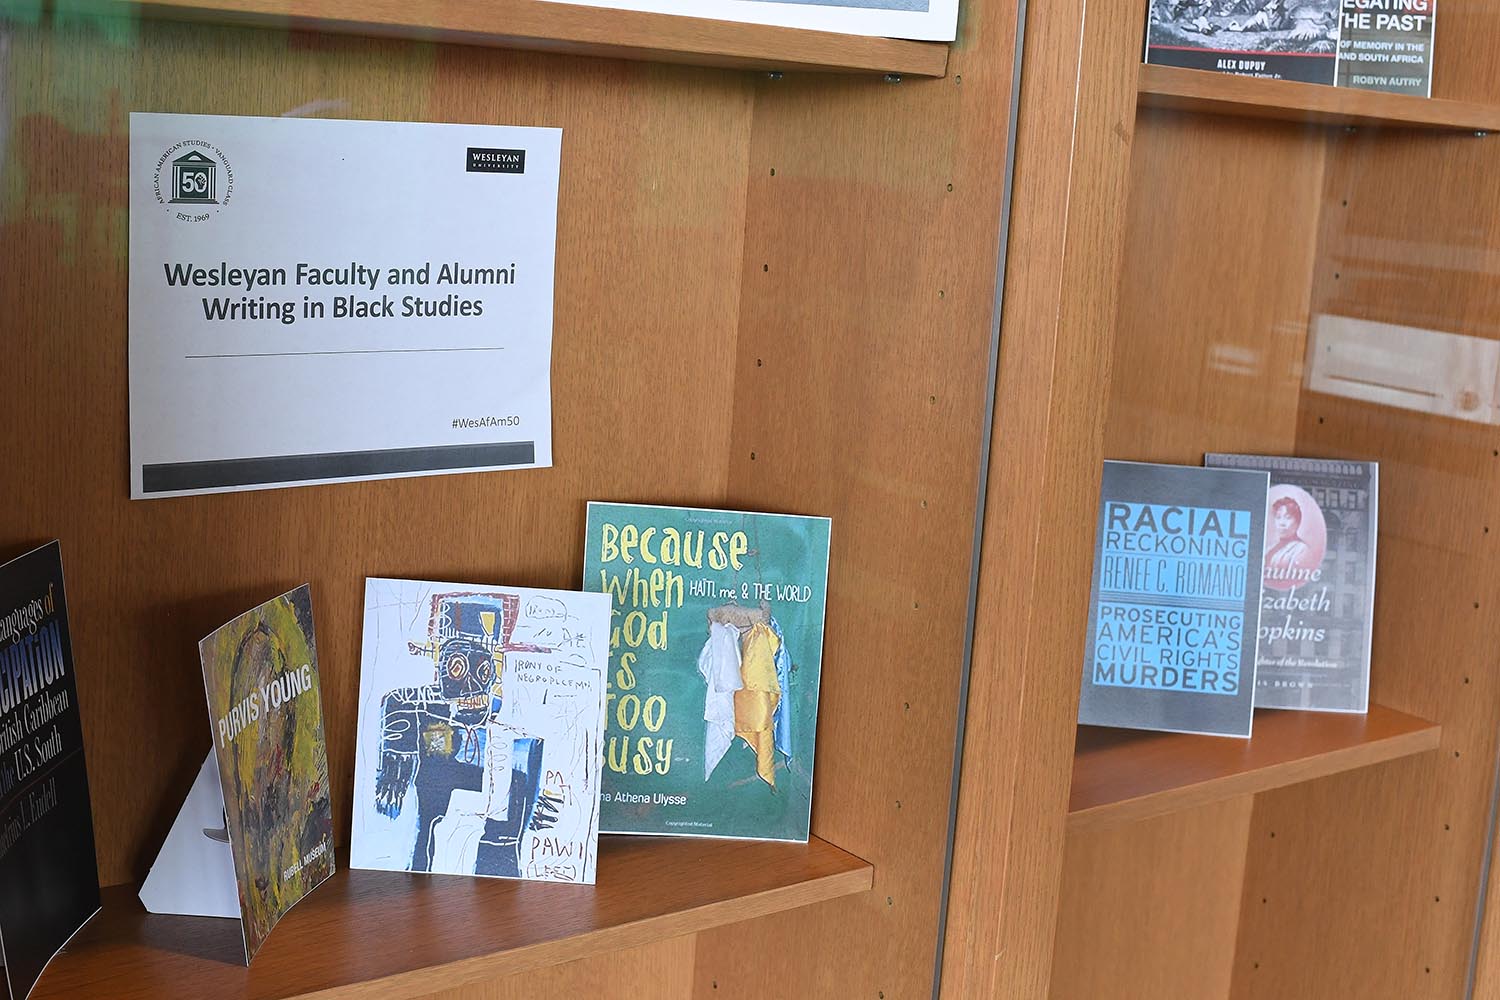 The "Books in Black Studies" exhibit, located in Daniel Family Commons, features several book covers by Wesleyan faculty and alumni authors. 